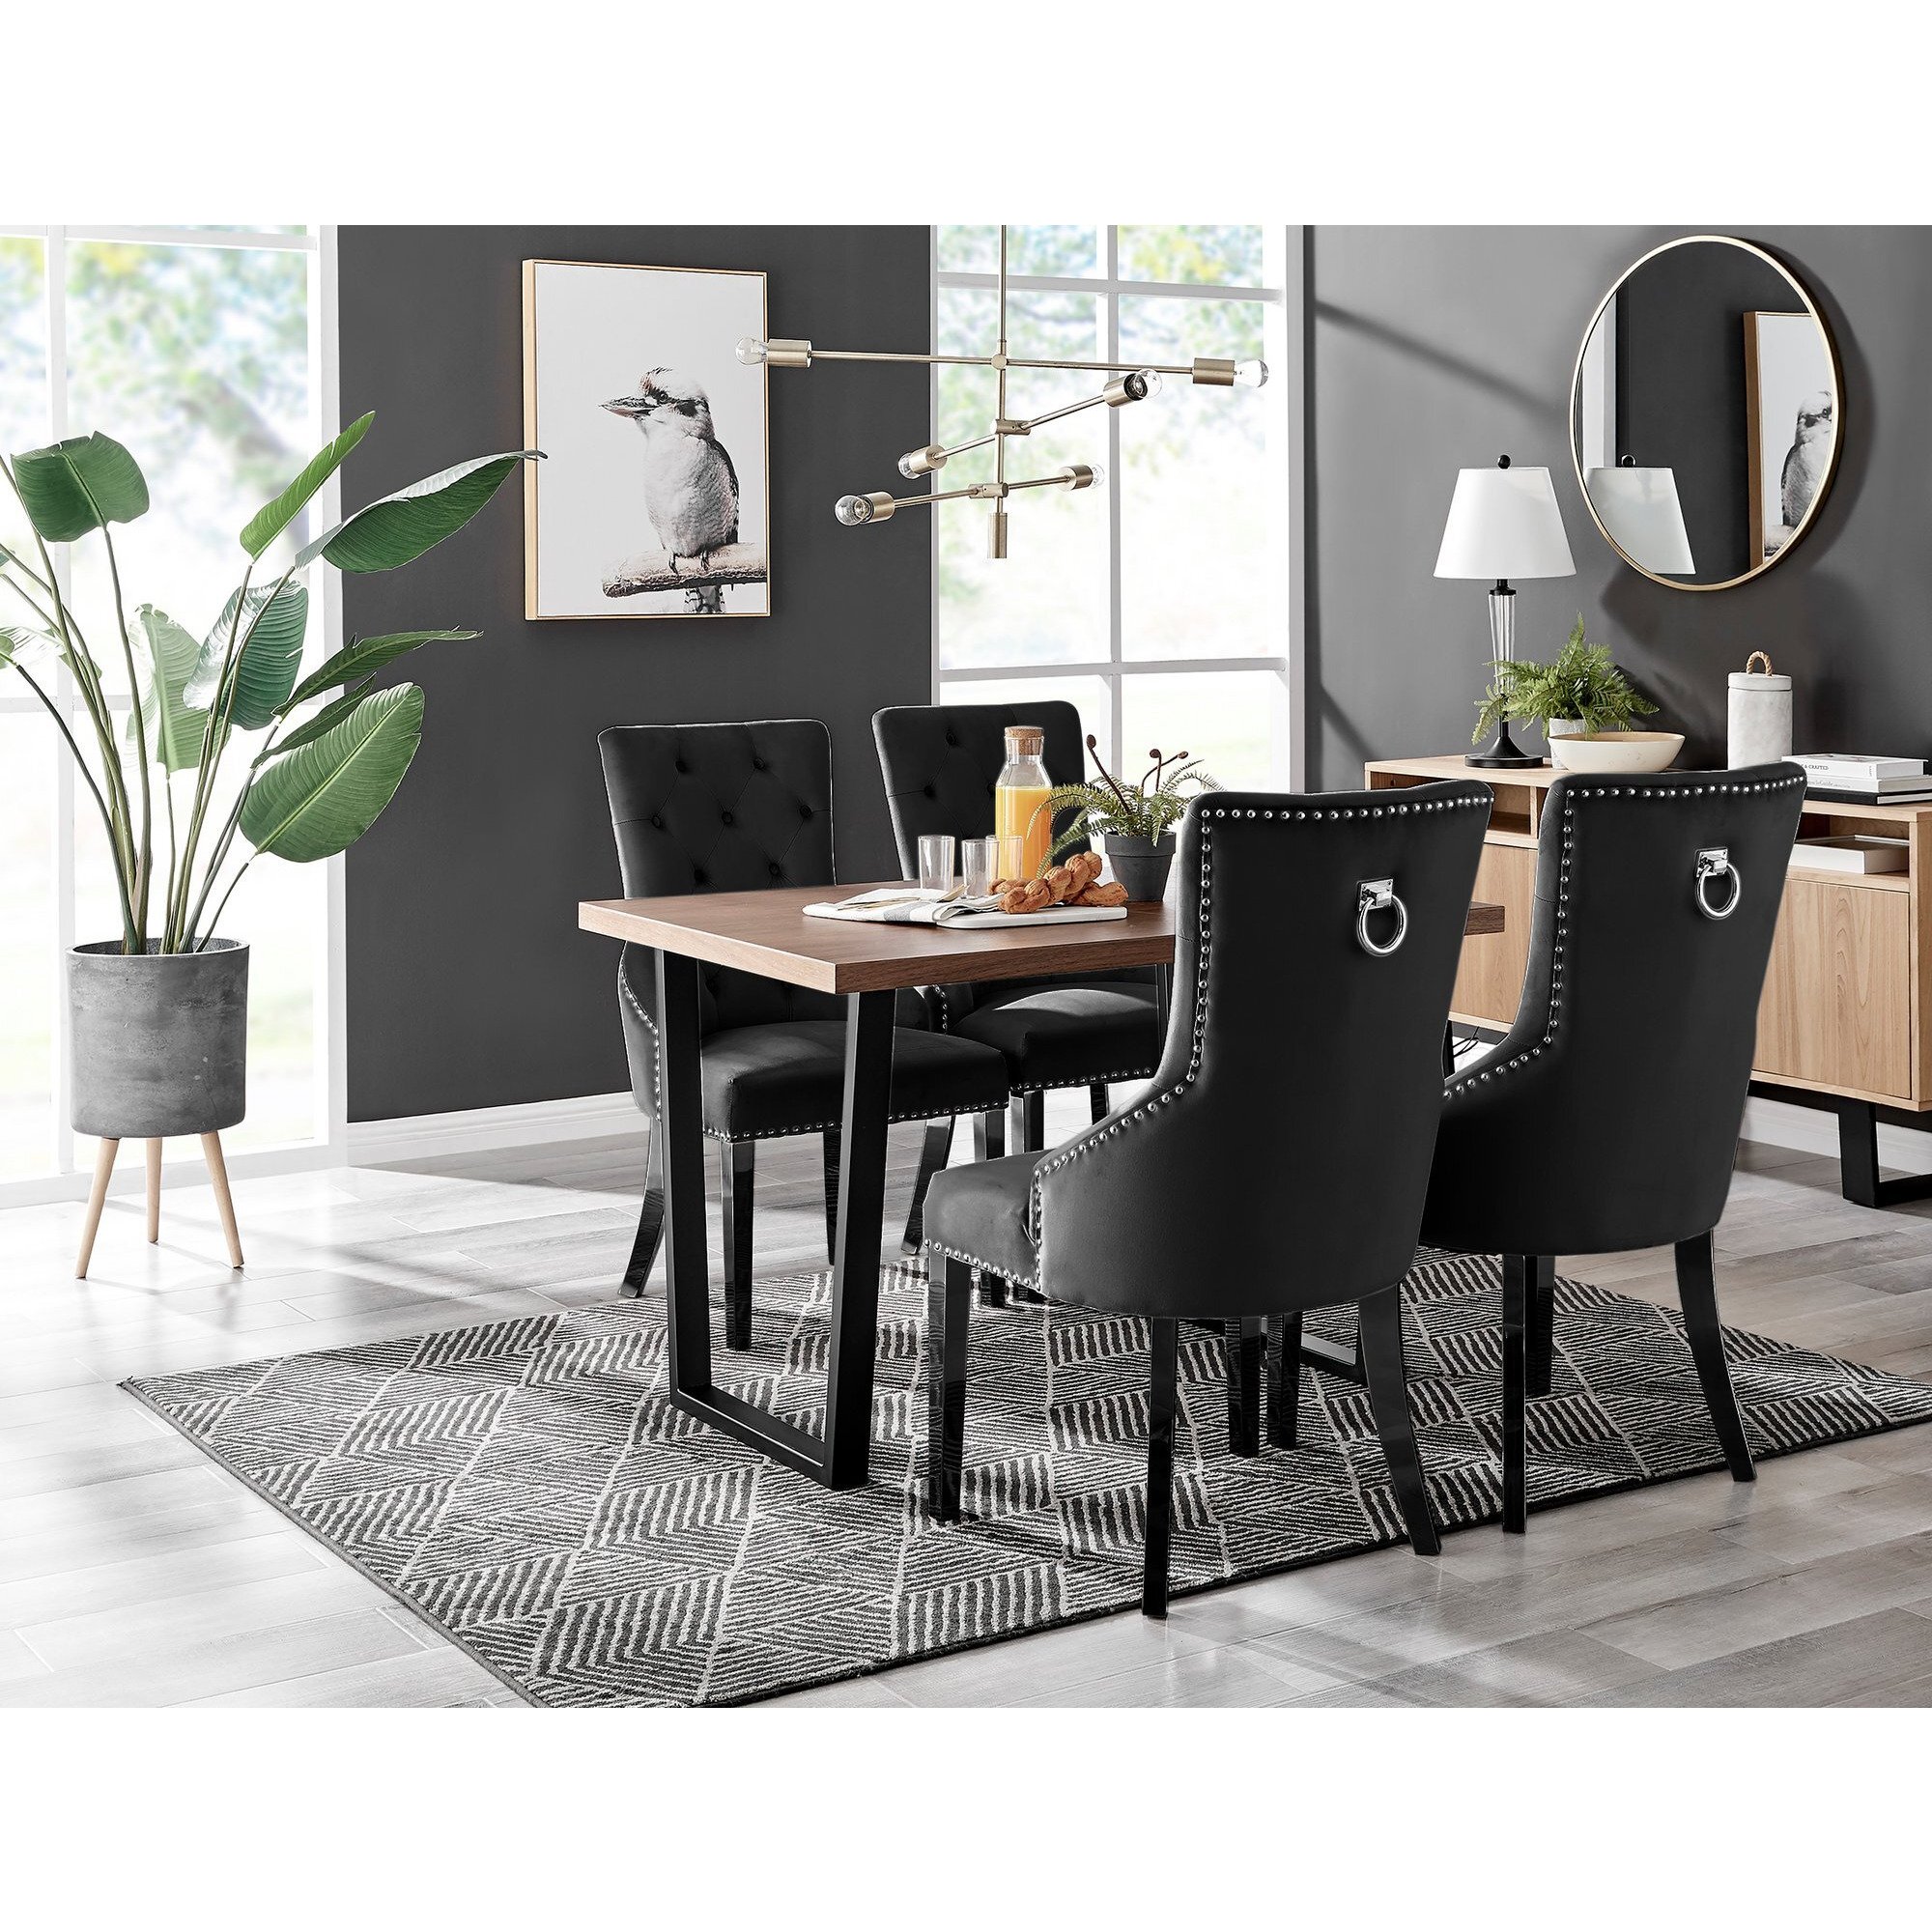 Kylo Brown Wood Effect Dining Table & 4 Belgravia Black Leg Chairs